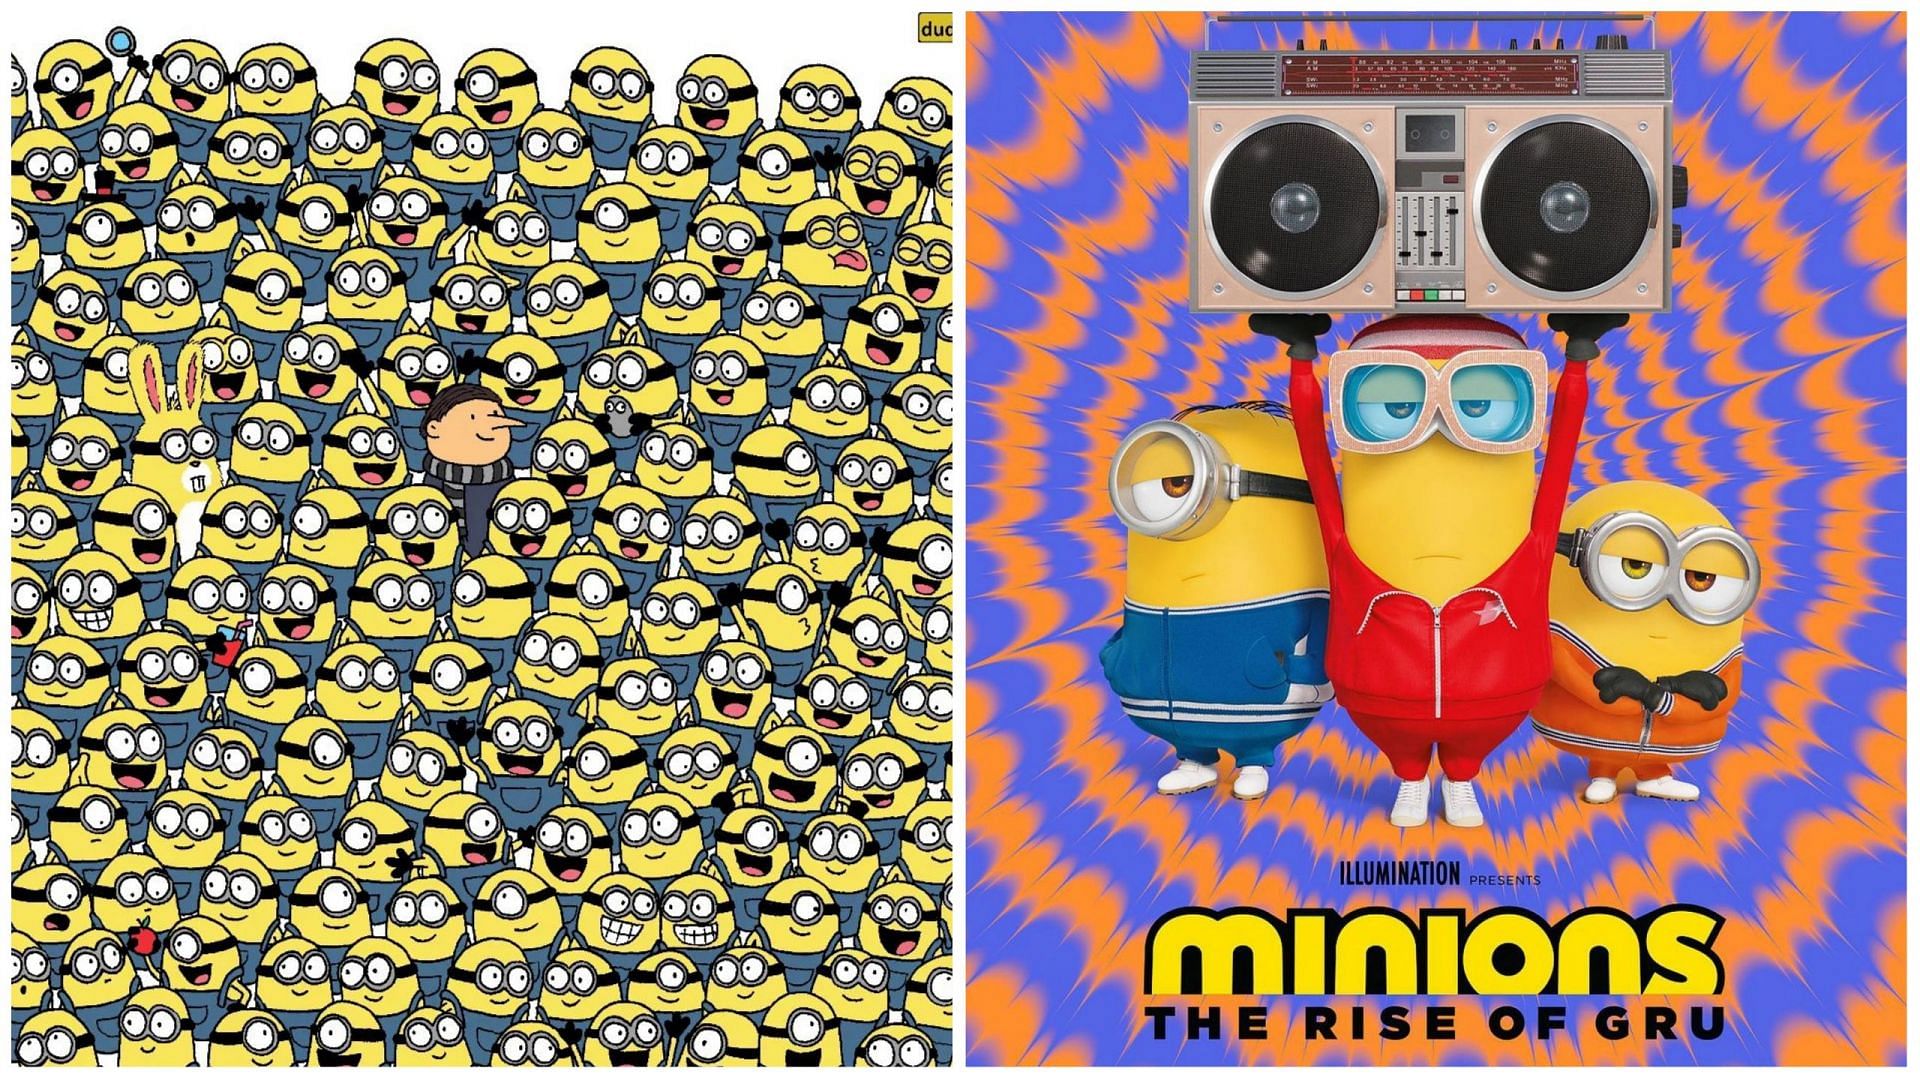 Minions fans are having fun trying to find bananas in a puzzle created by The Dudolf (Image via @thedudolf and @minions/Instagram)